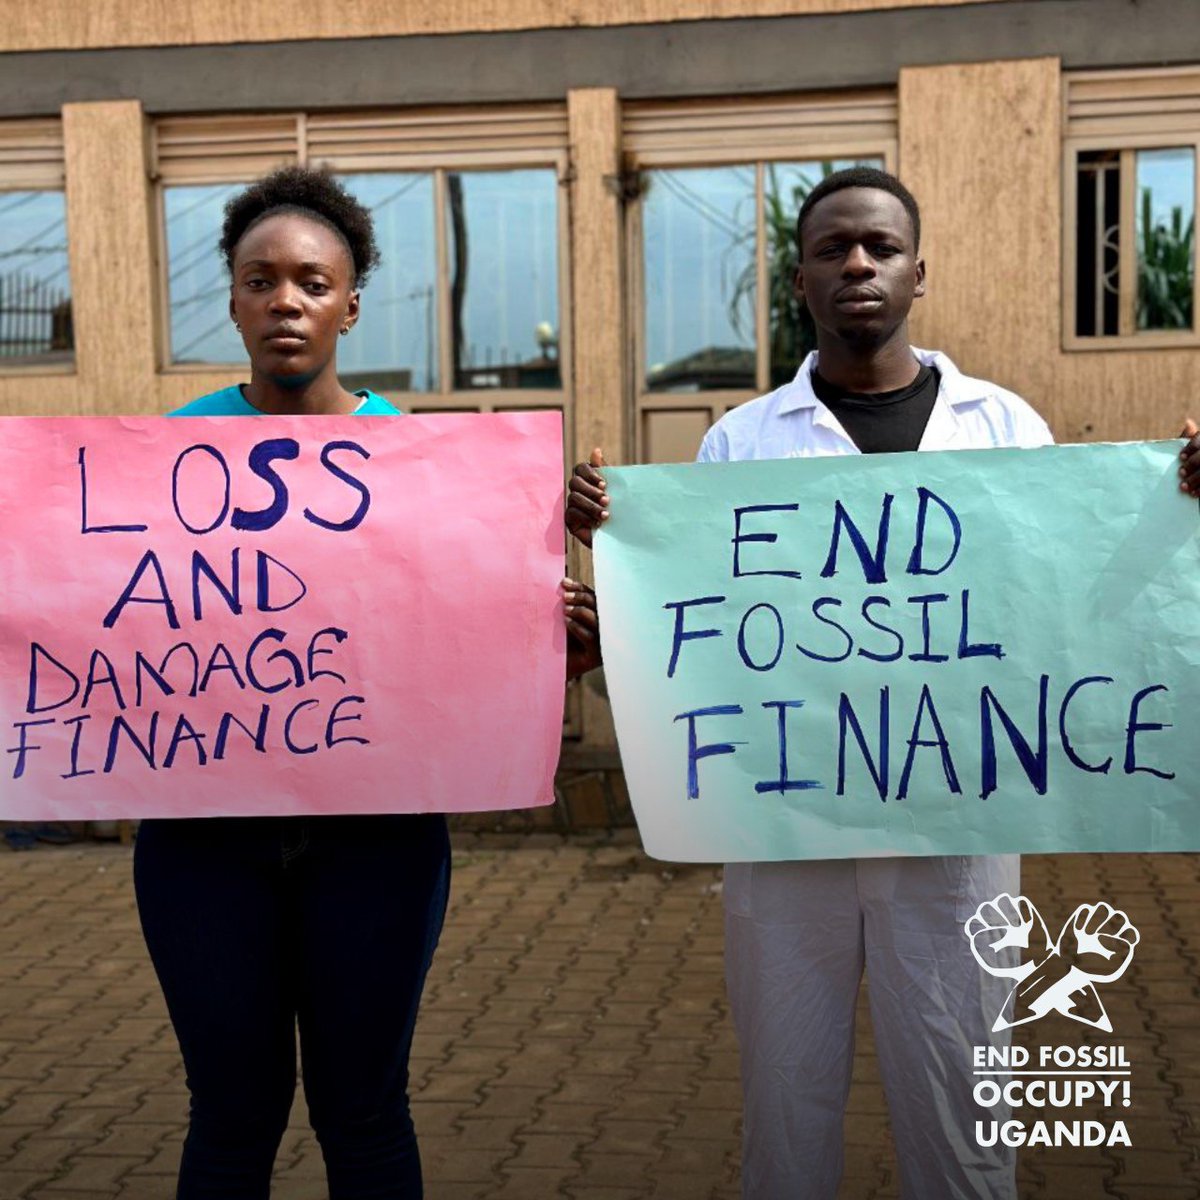 📢 #EndFossilFinance instead pay up for #LossAndDamage that you have caused in the global south.
#MakePollutersPay 
#climatefinance #ClimateAction